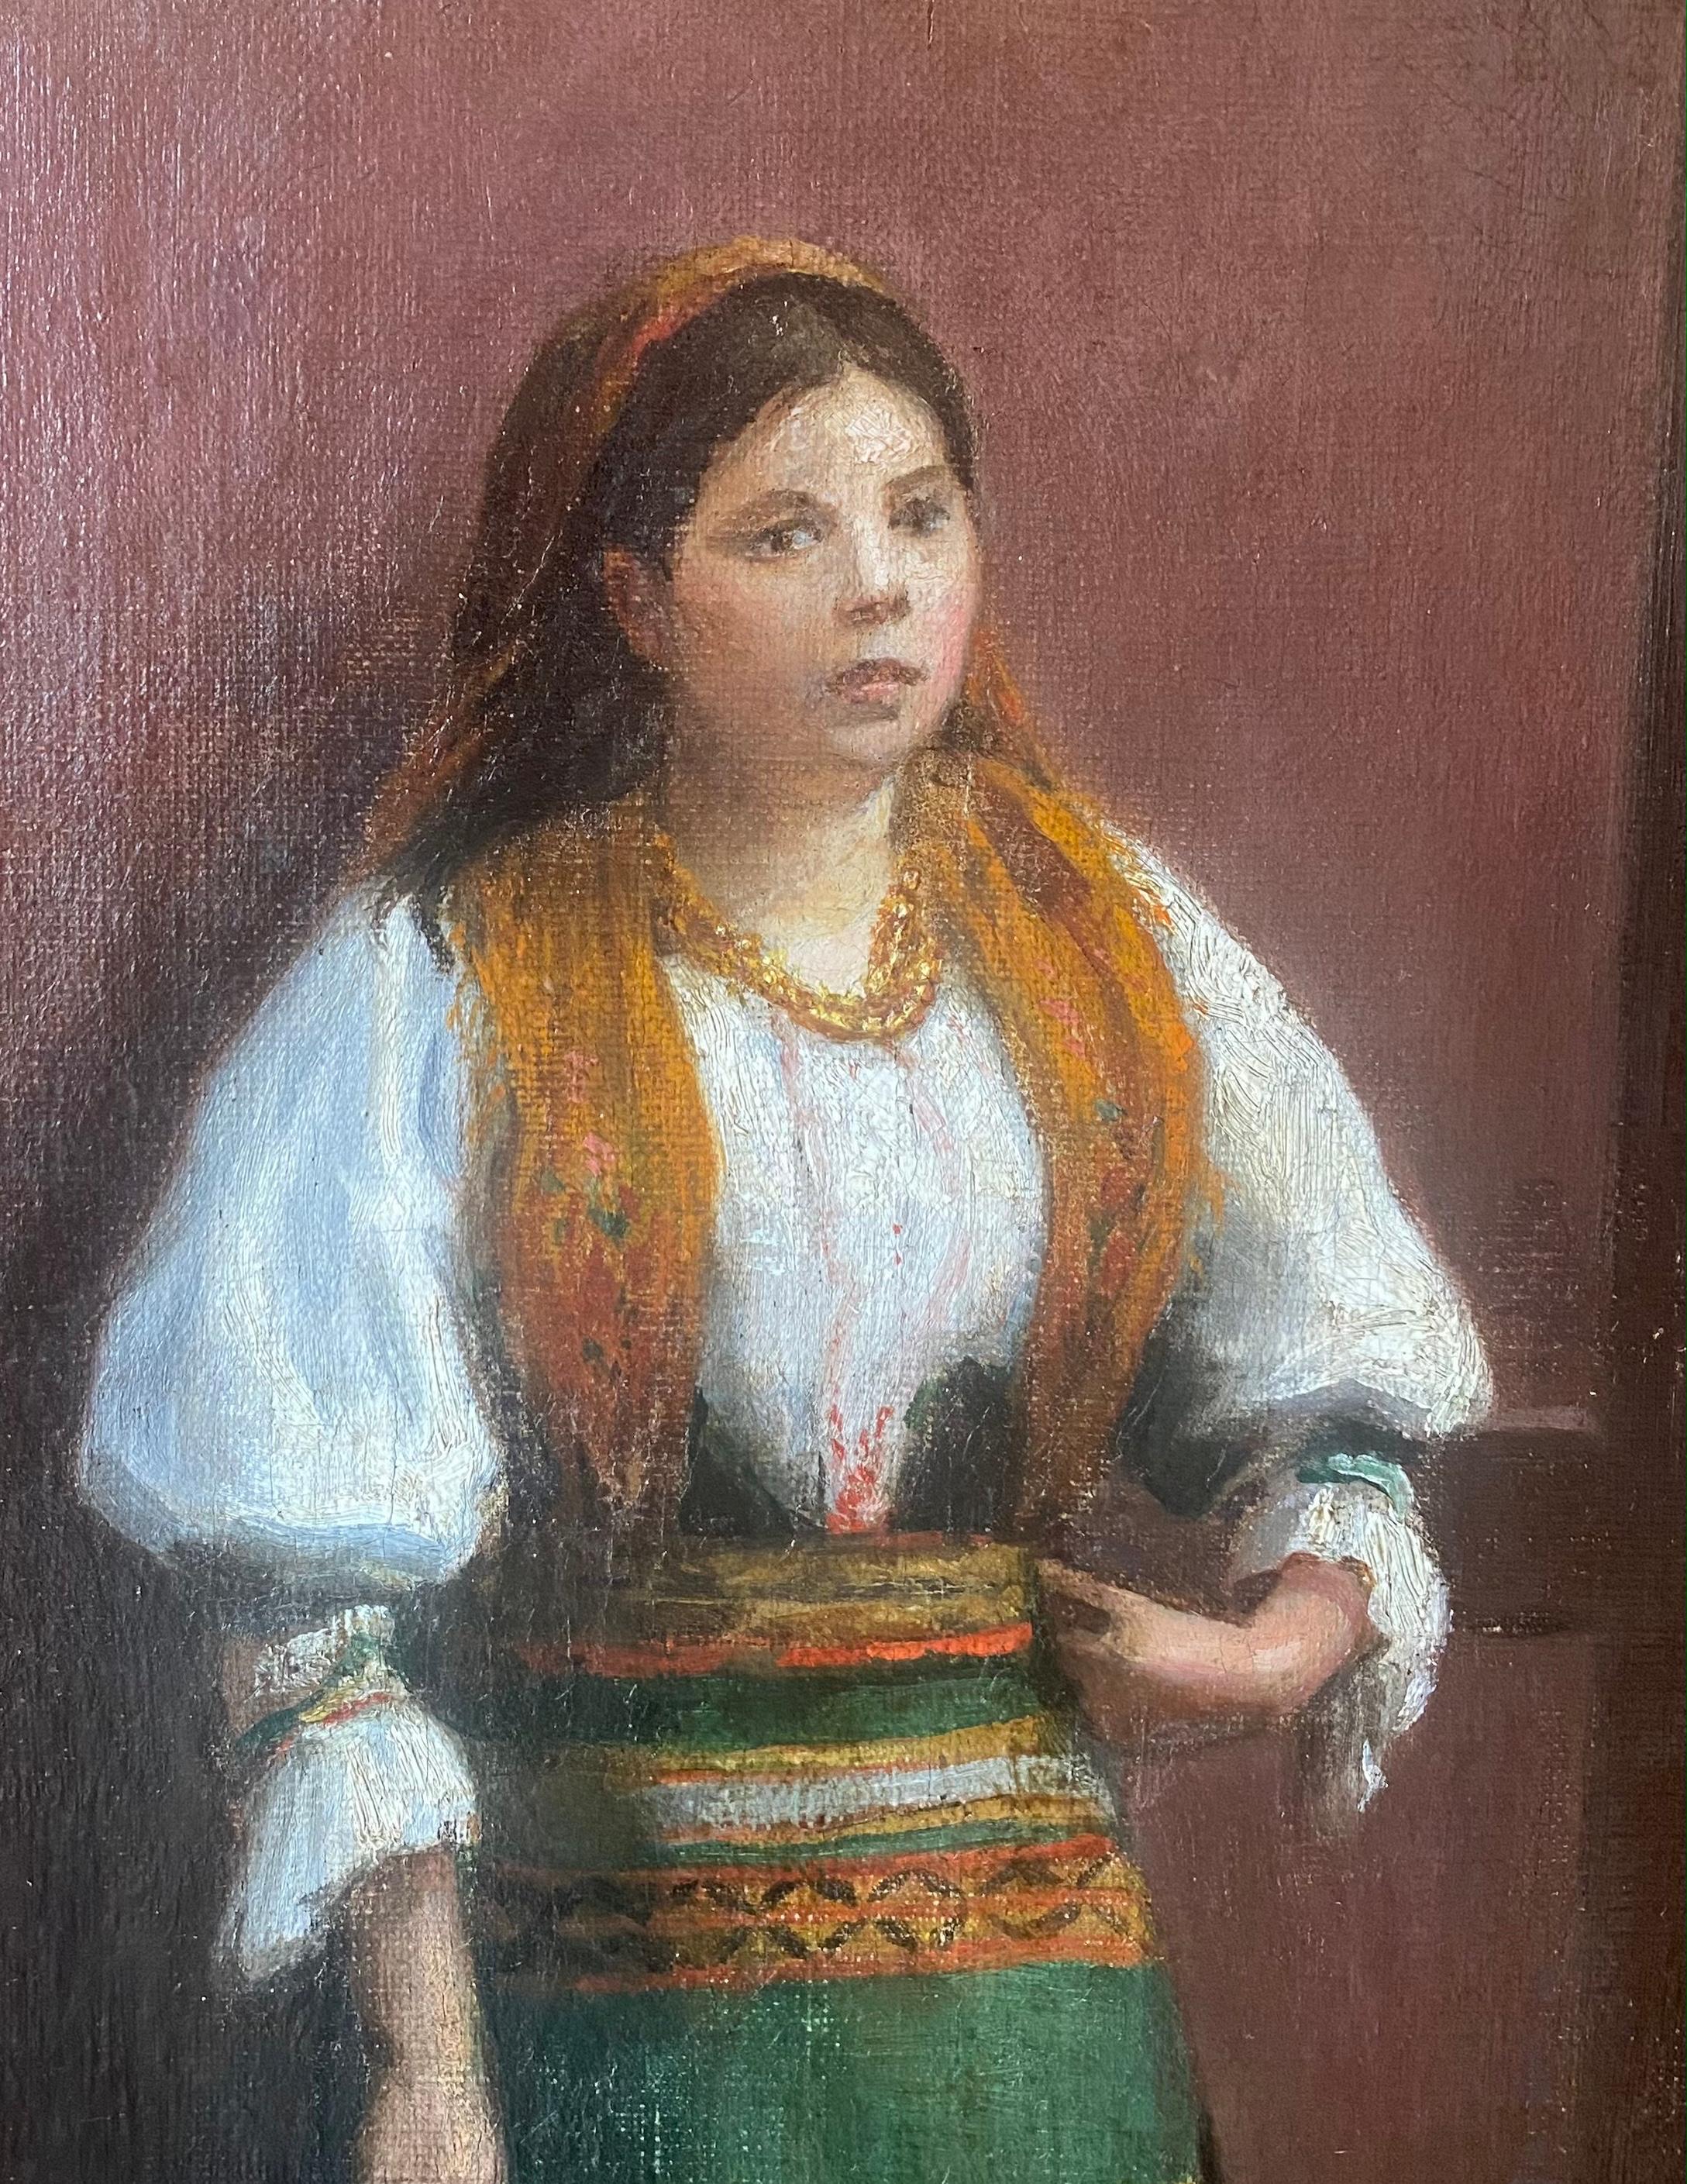 The first time model: the enigmatic young bohemian girl in traditional dress   (Akademisch), Painting, von Unknown